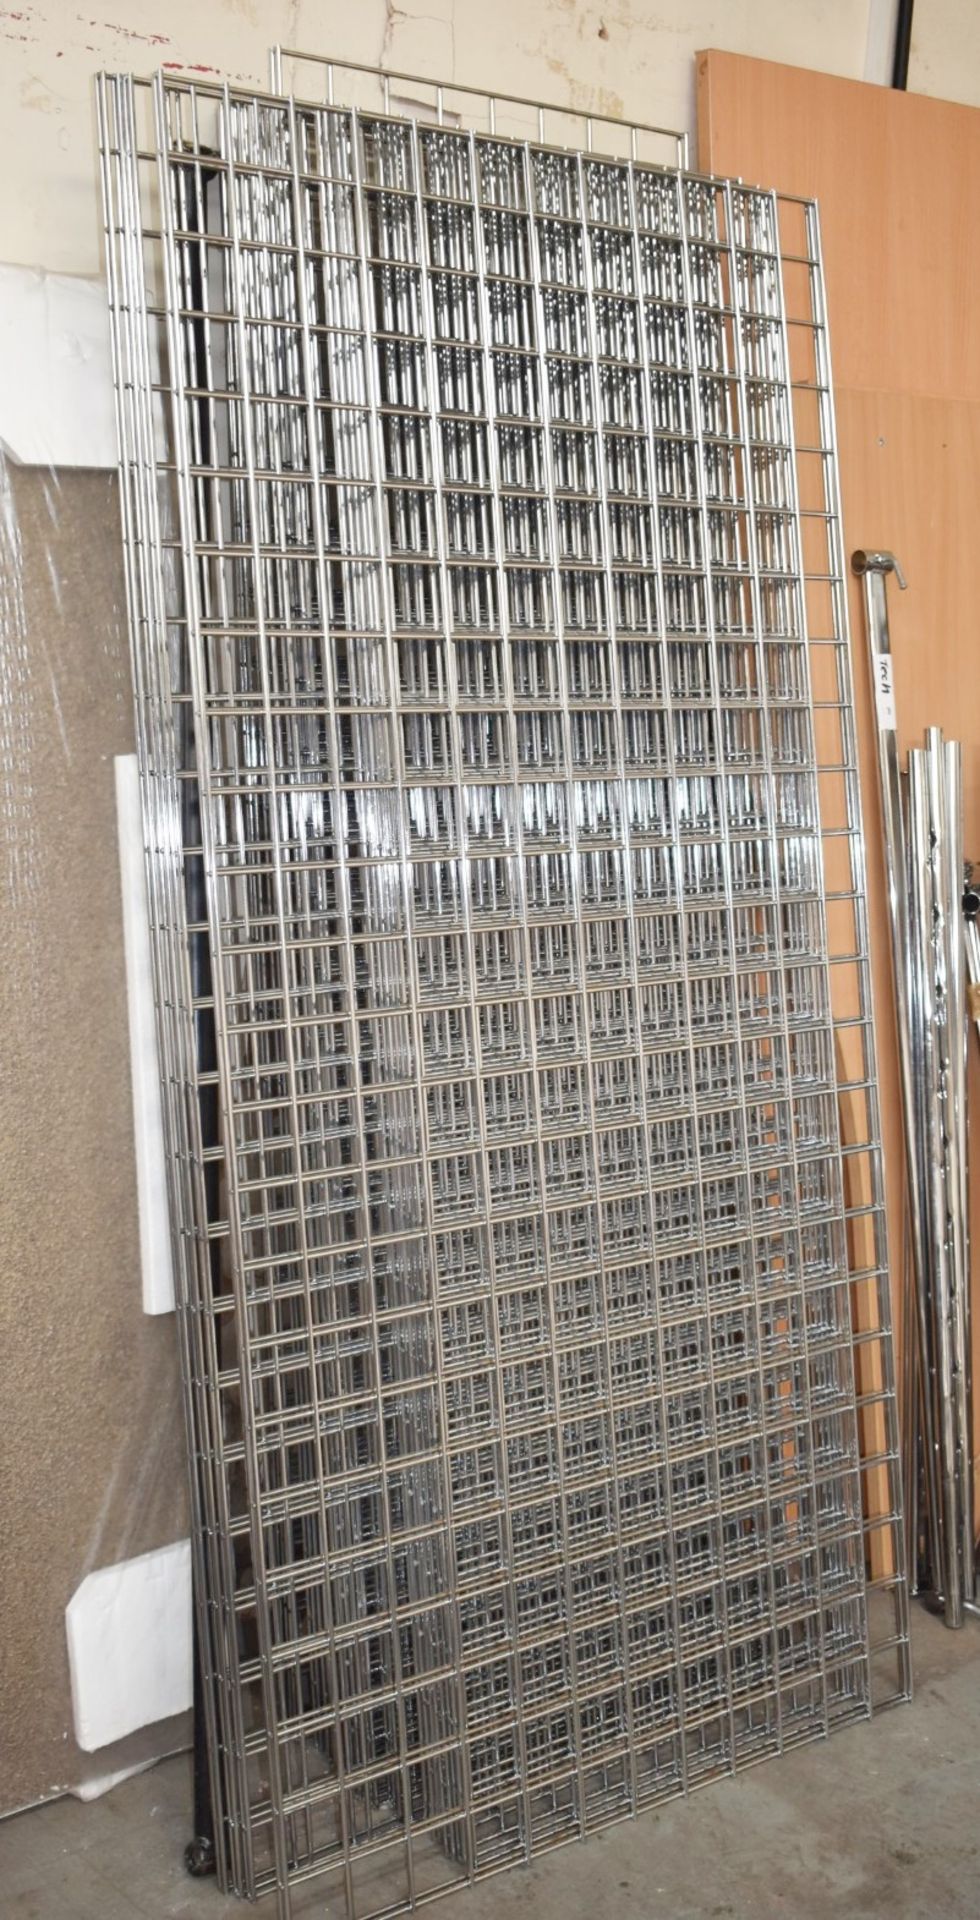 10 x Gridwall Mesh Wall Panels - Heavy Metal Construction in Chrome - Ideal For Retail Wall Displays